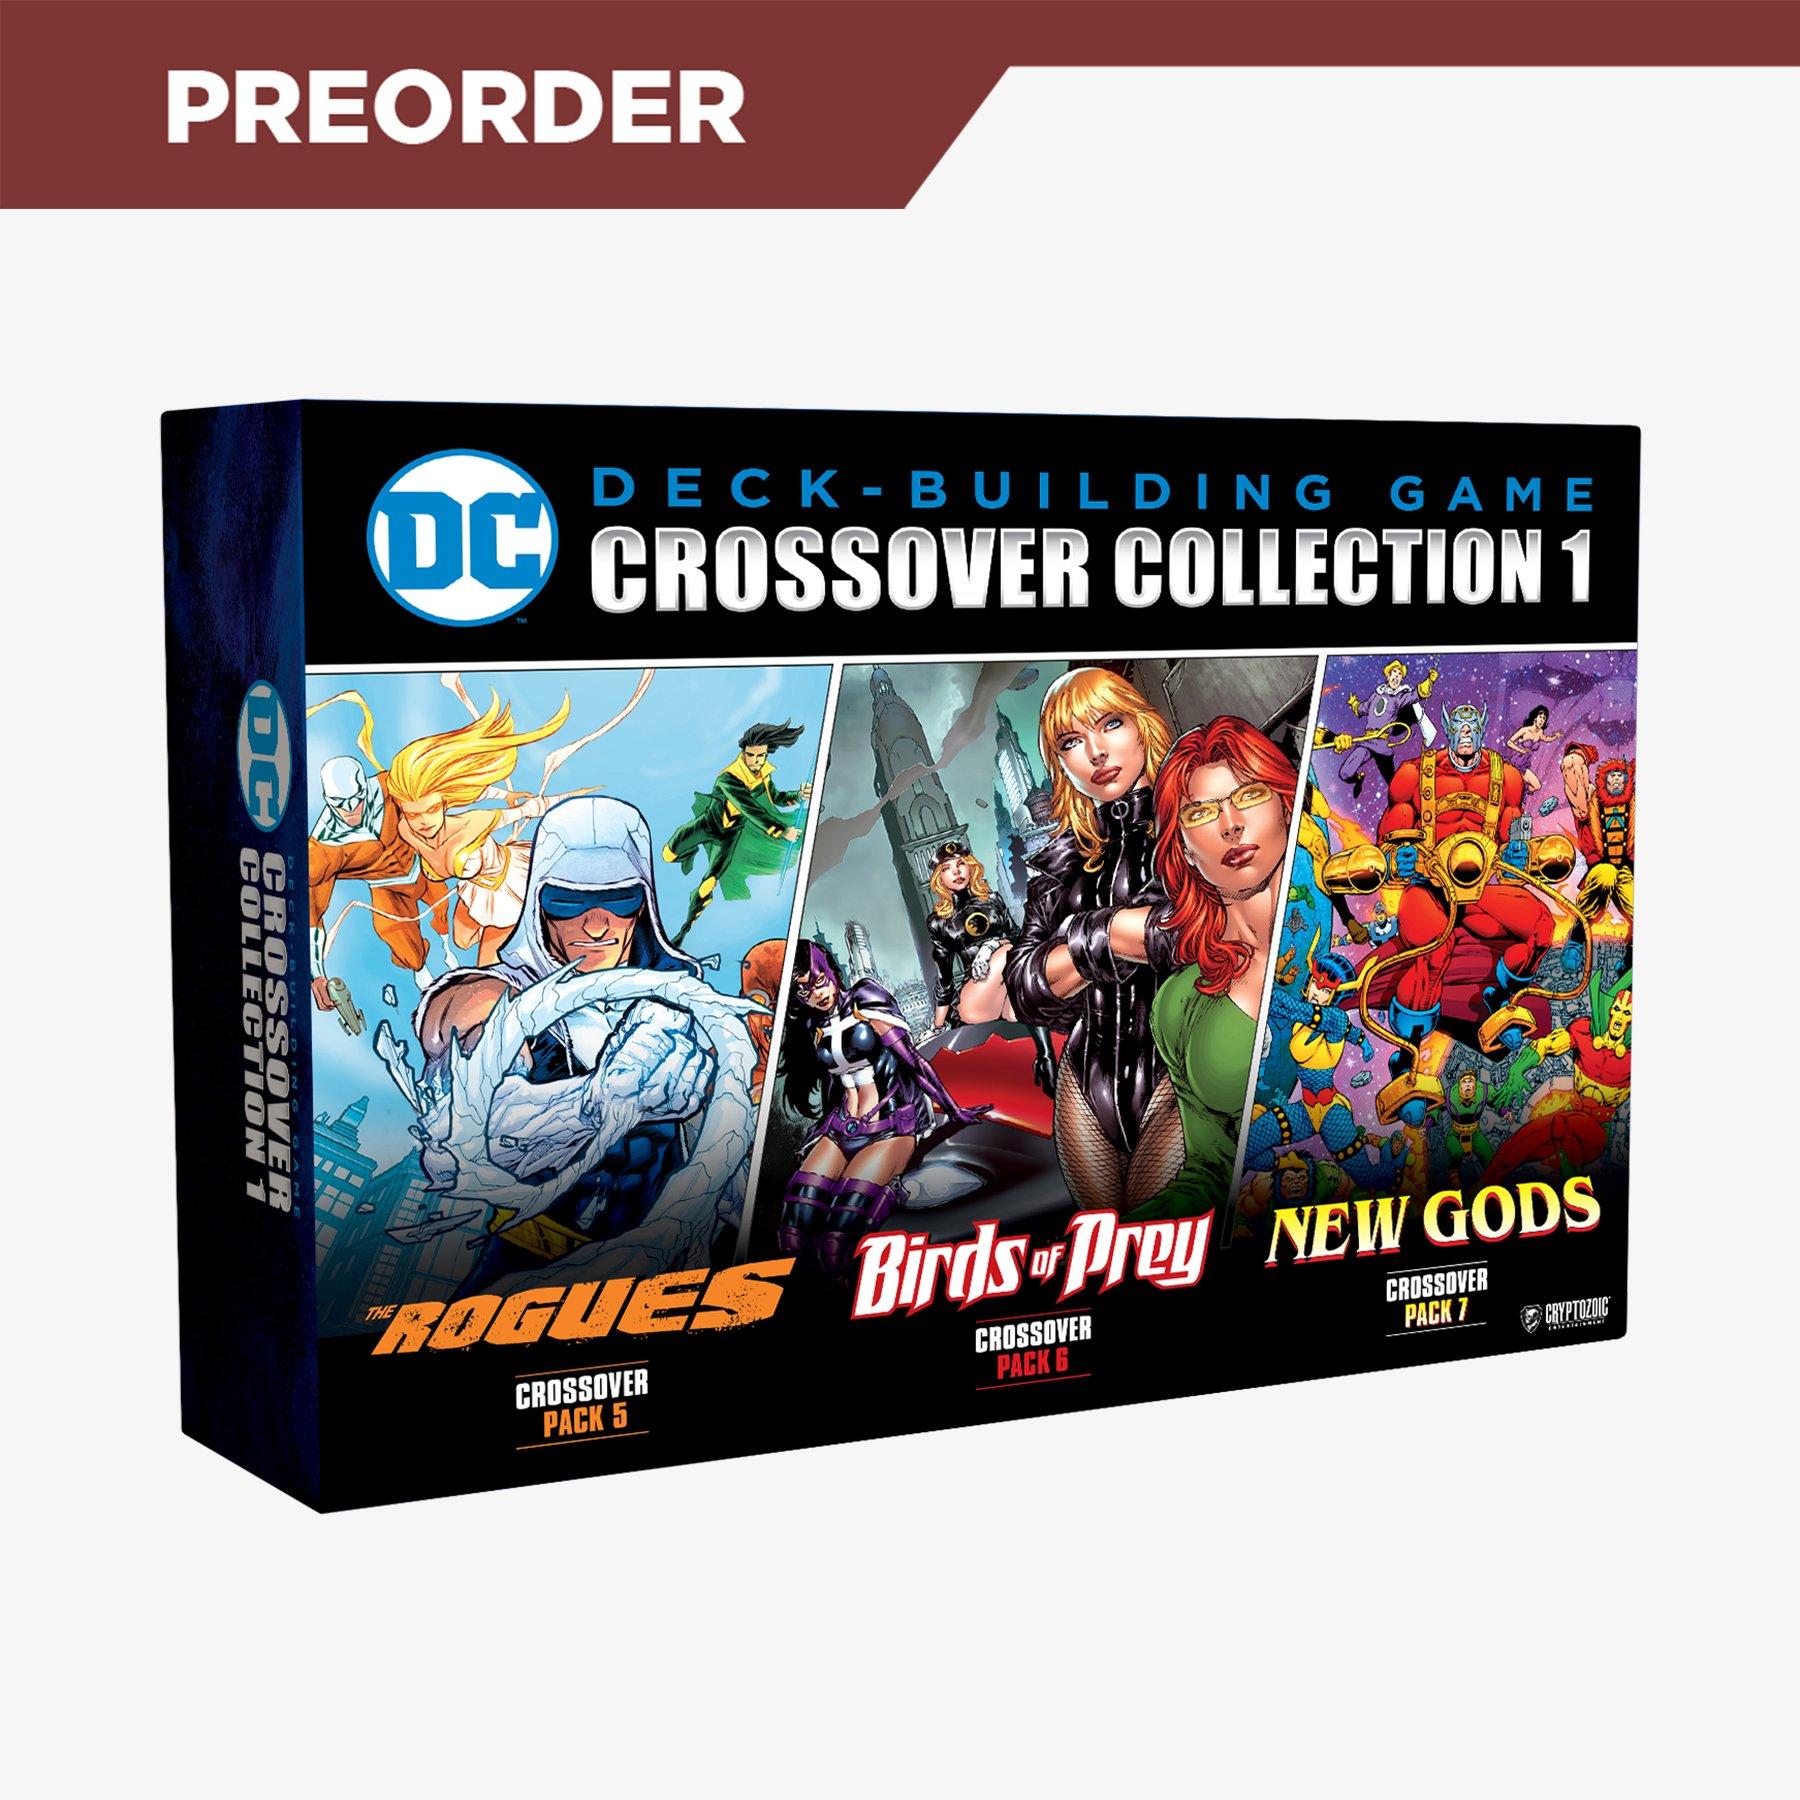 DC Deck-Building Game Crossover Collection Features Birds of Prey and More